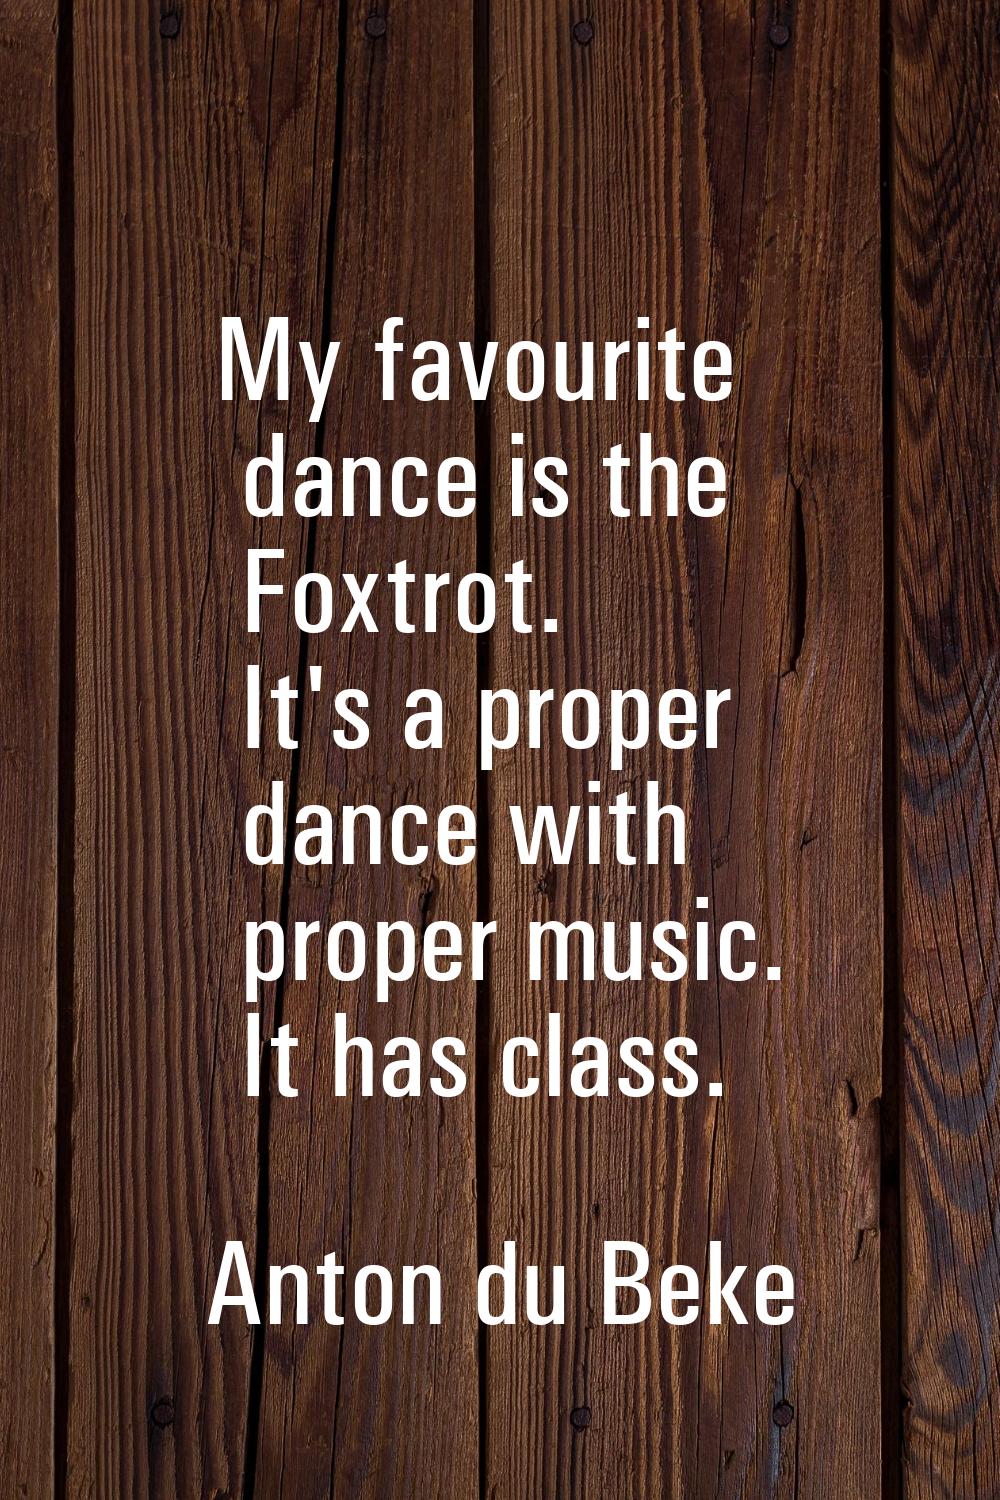 My favourite dance is the Foxtrot. It's a proper dance with proper music. It has class.